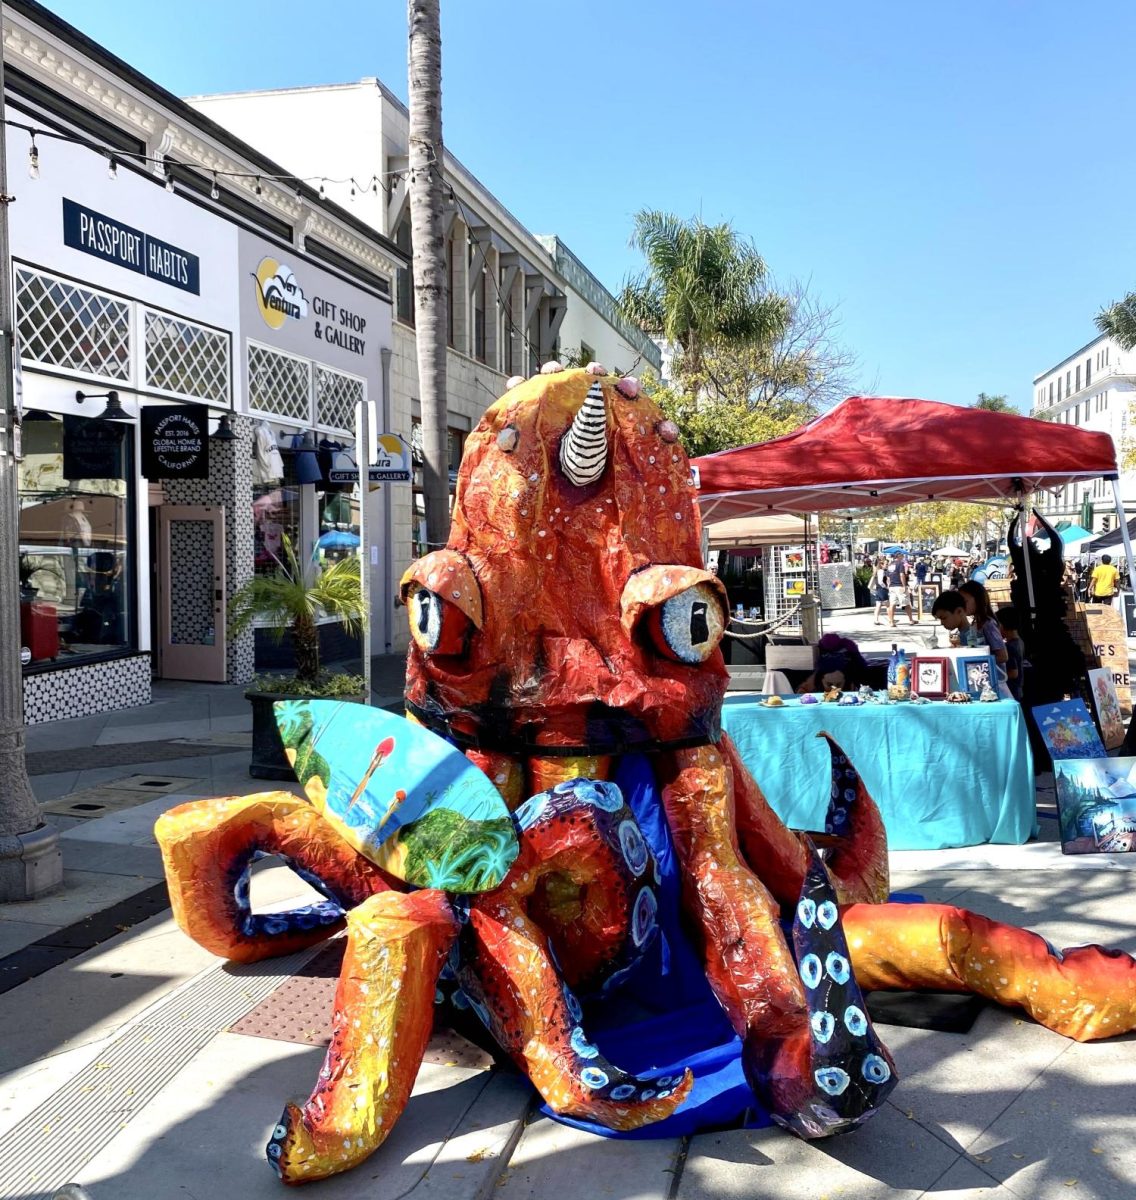 An enormous, eye-catching paper mache octopus is situated at the start of the ArtWalk exhibition on Main St., Ventura, greeting attendees as they enter the event. Inspired by Ventura’s natural environment, this work of art highlights the abundance of sea creatures that call our oceans home.